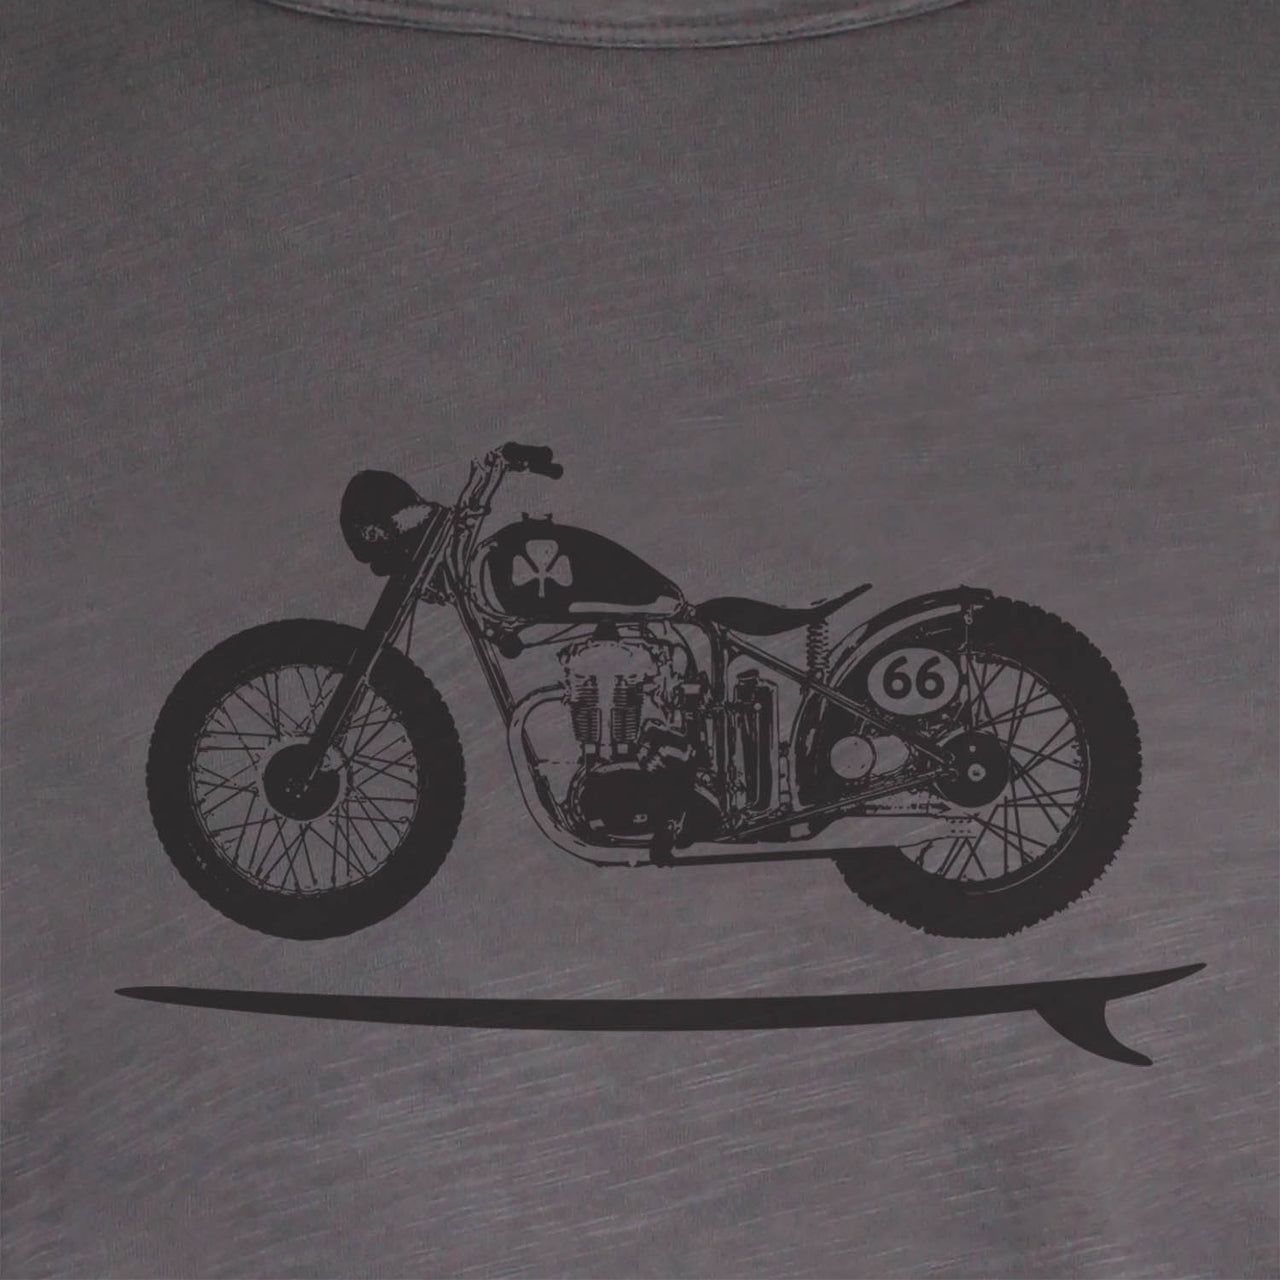 Bike Board Tee - Grey.   ONLY XS AND 2XL left.